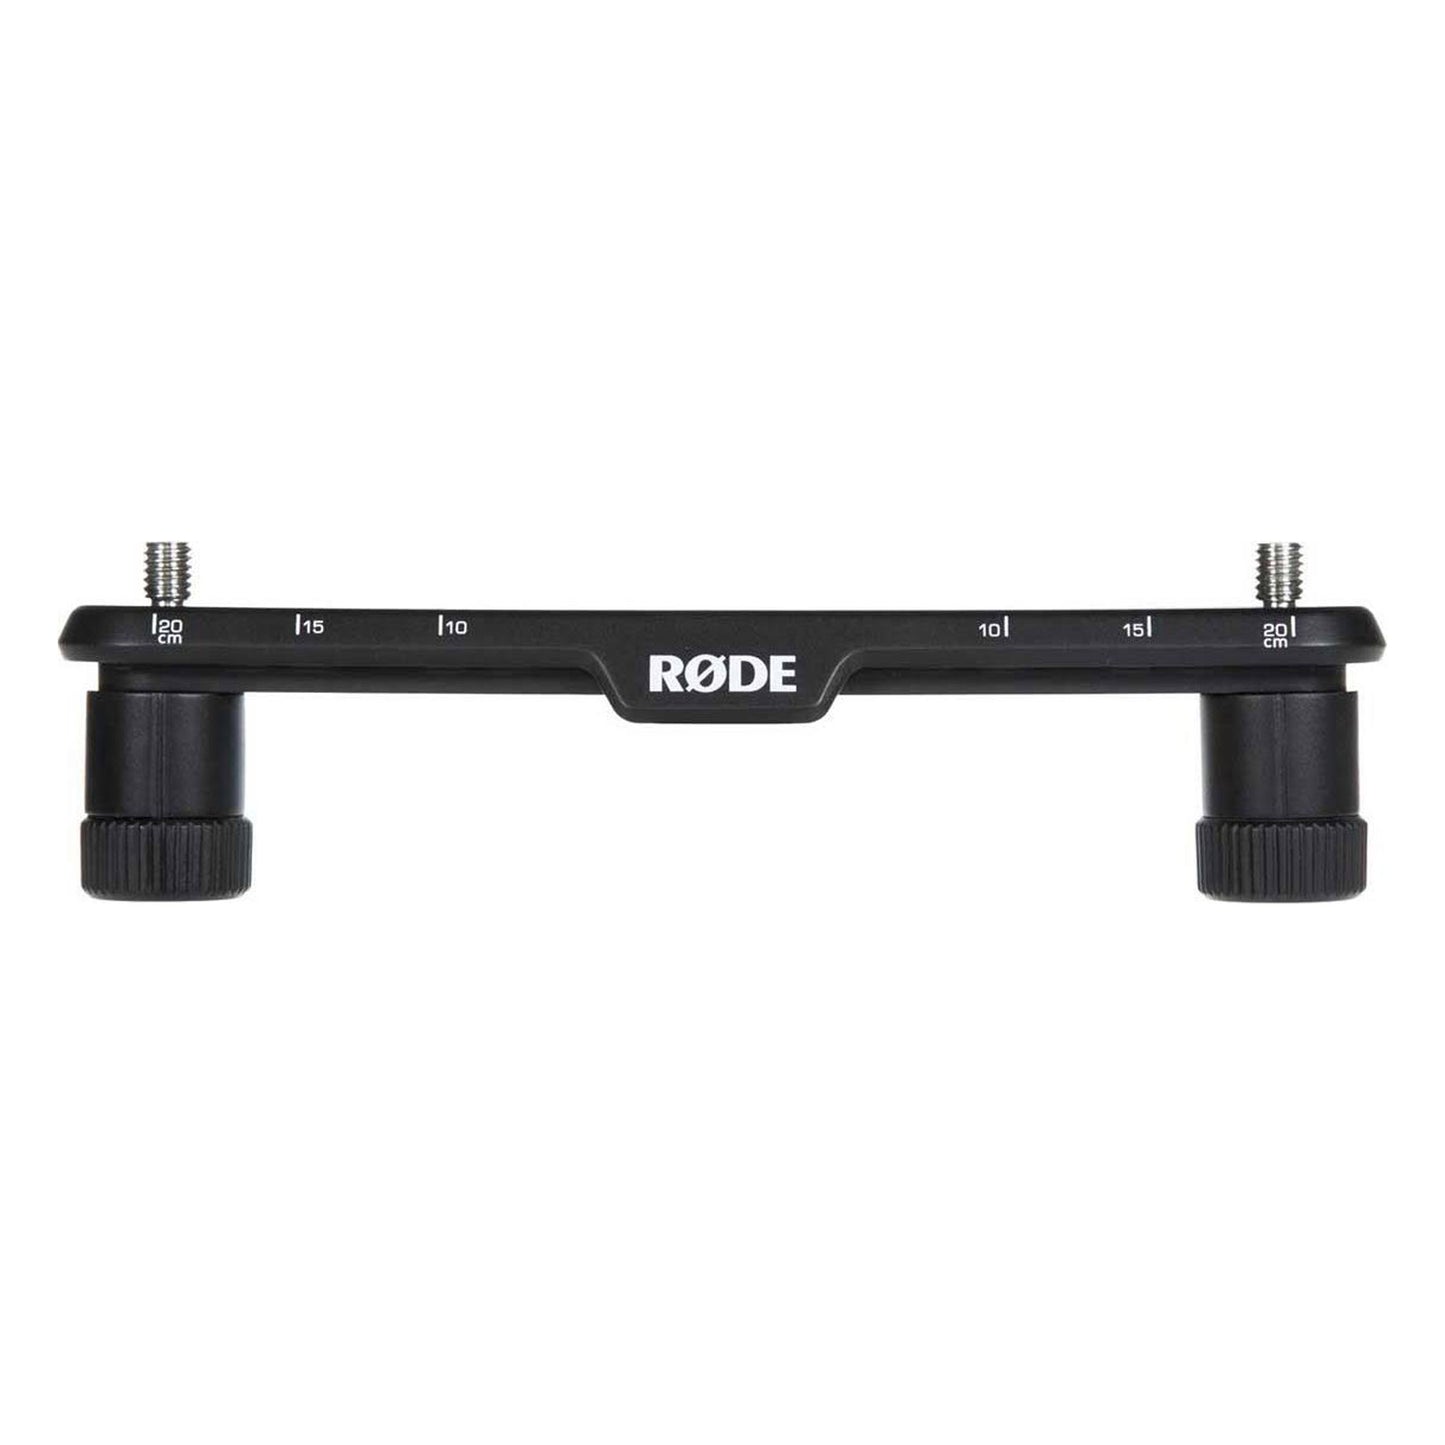 Rode High-Quality Stereo Bar For Mounting Multiple Microphones